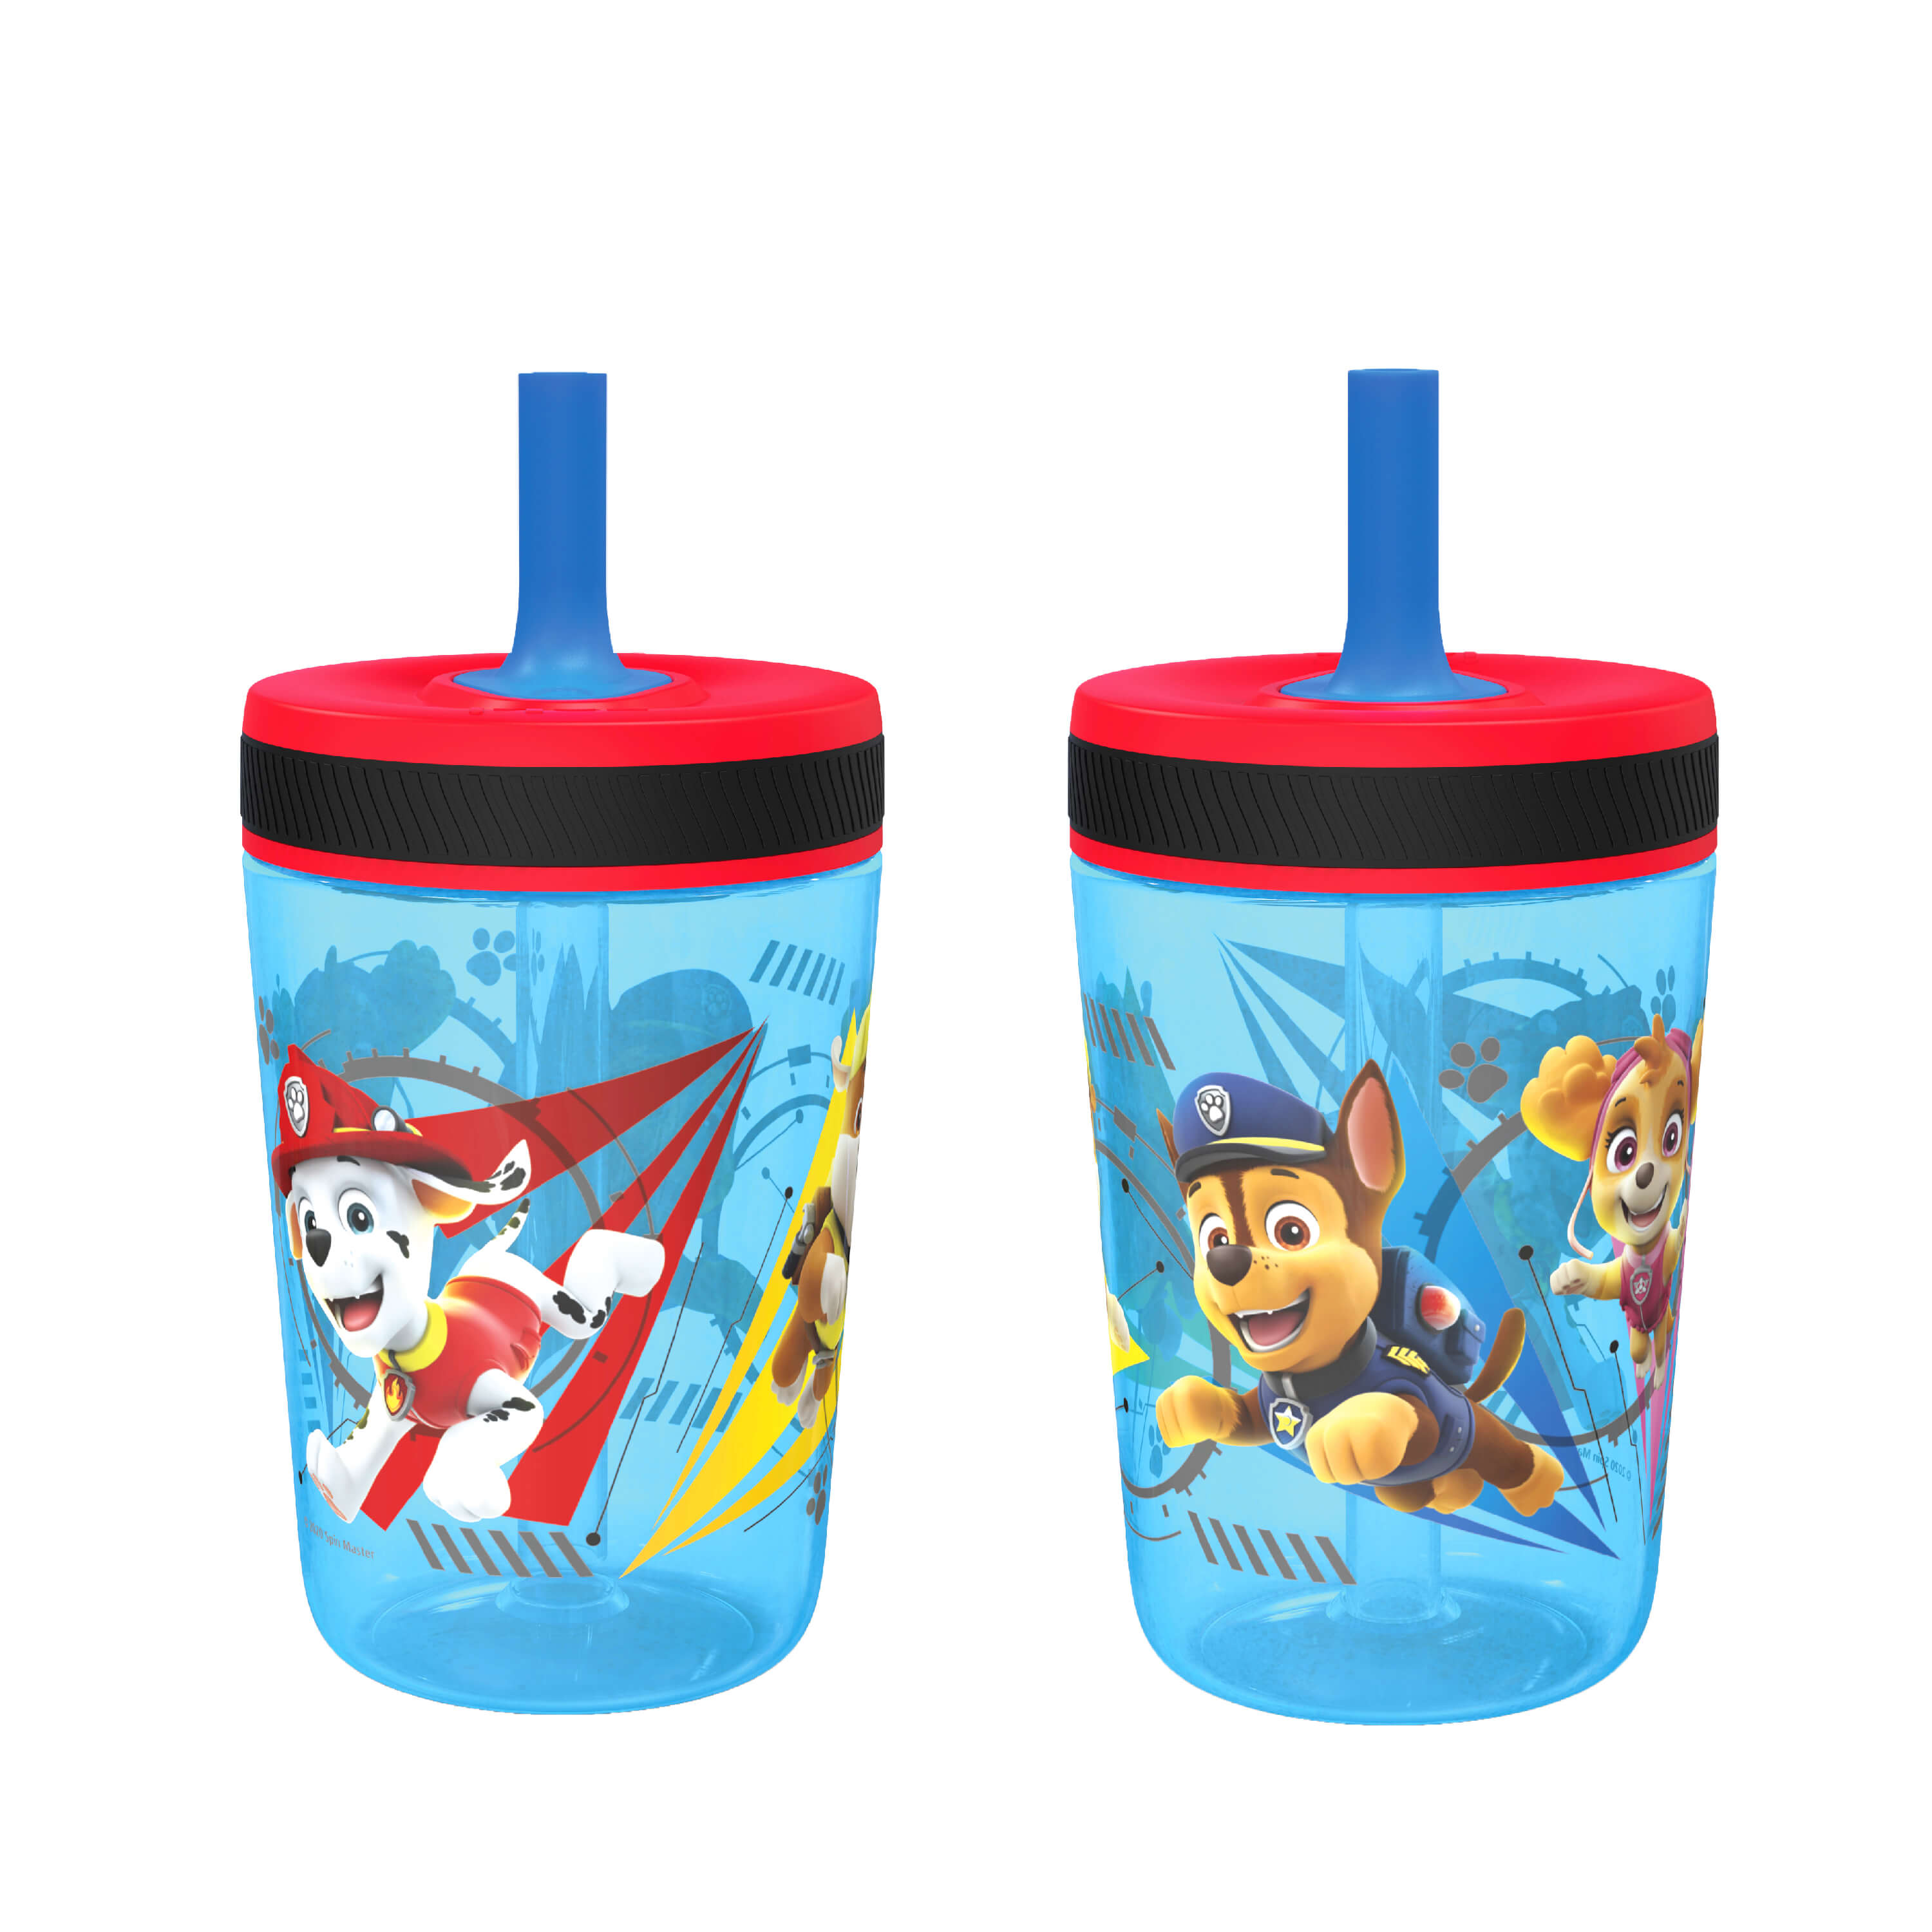  Zak Designs Bluey Kelso Toddler Cups For Travel or At